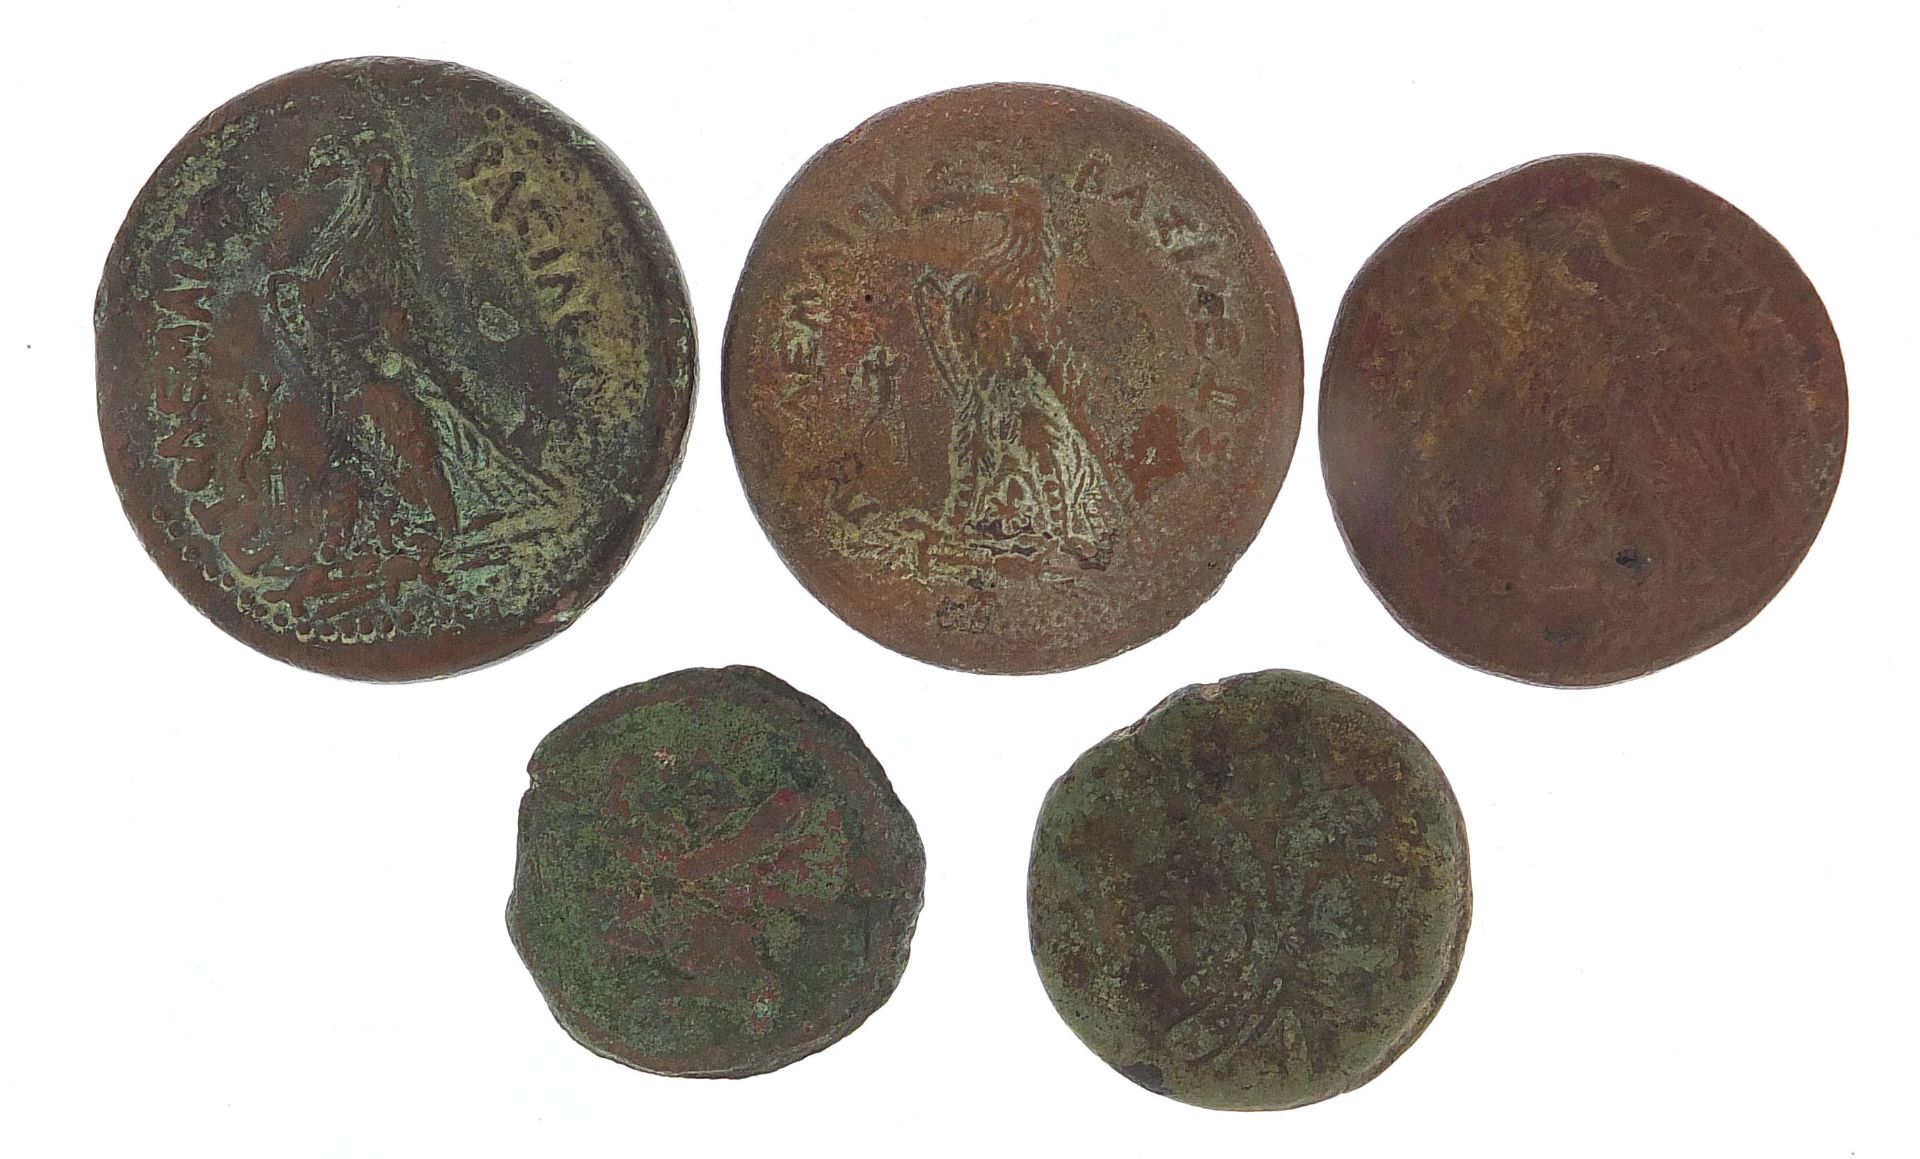 Five Greek/Egyptian coins, 216.4g, the largest 41mm in diameter